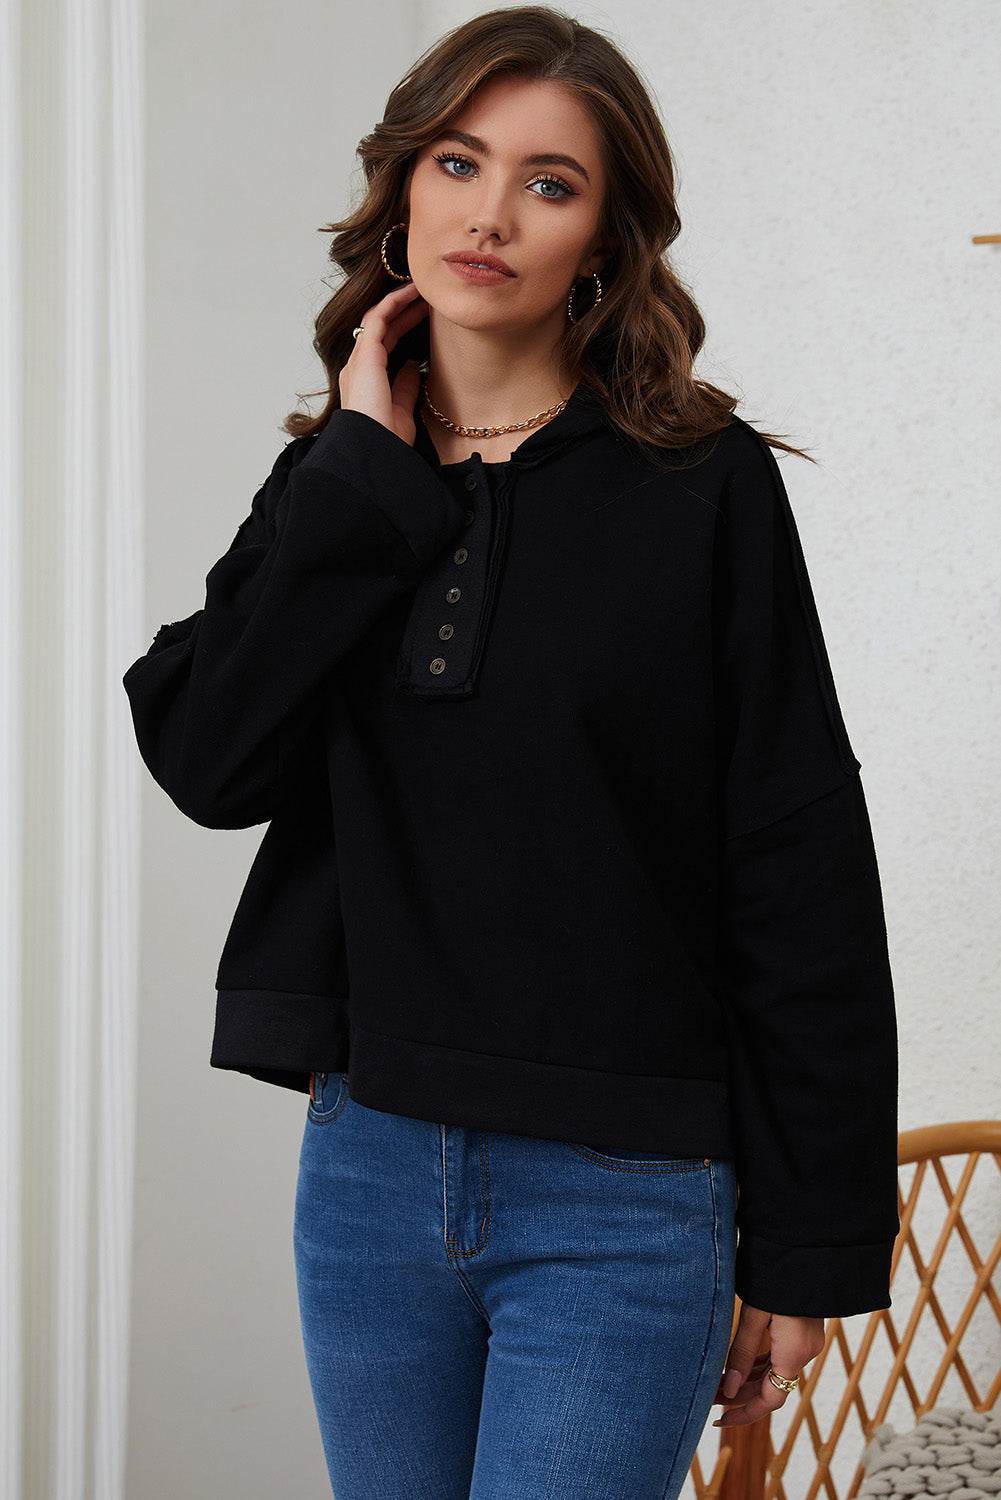 Quarter-Button Exposed Seam Dropped Shoulder Hoodie - Black / S - Women’s Clothing & Accessories - Shirts & Tops - 13